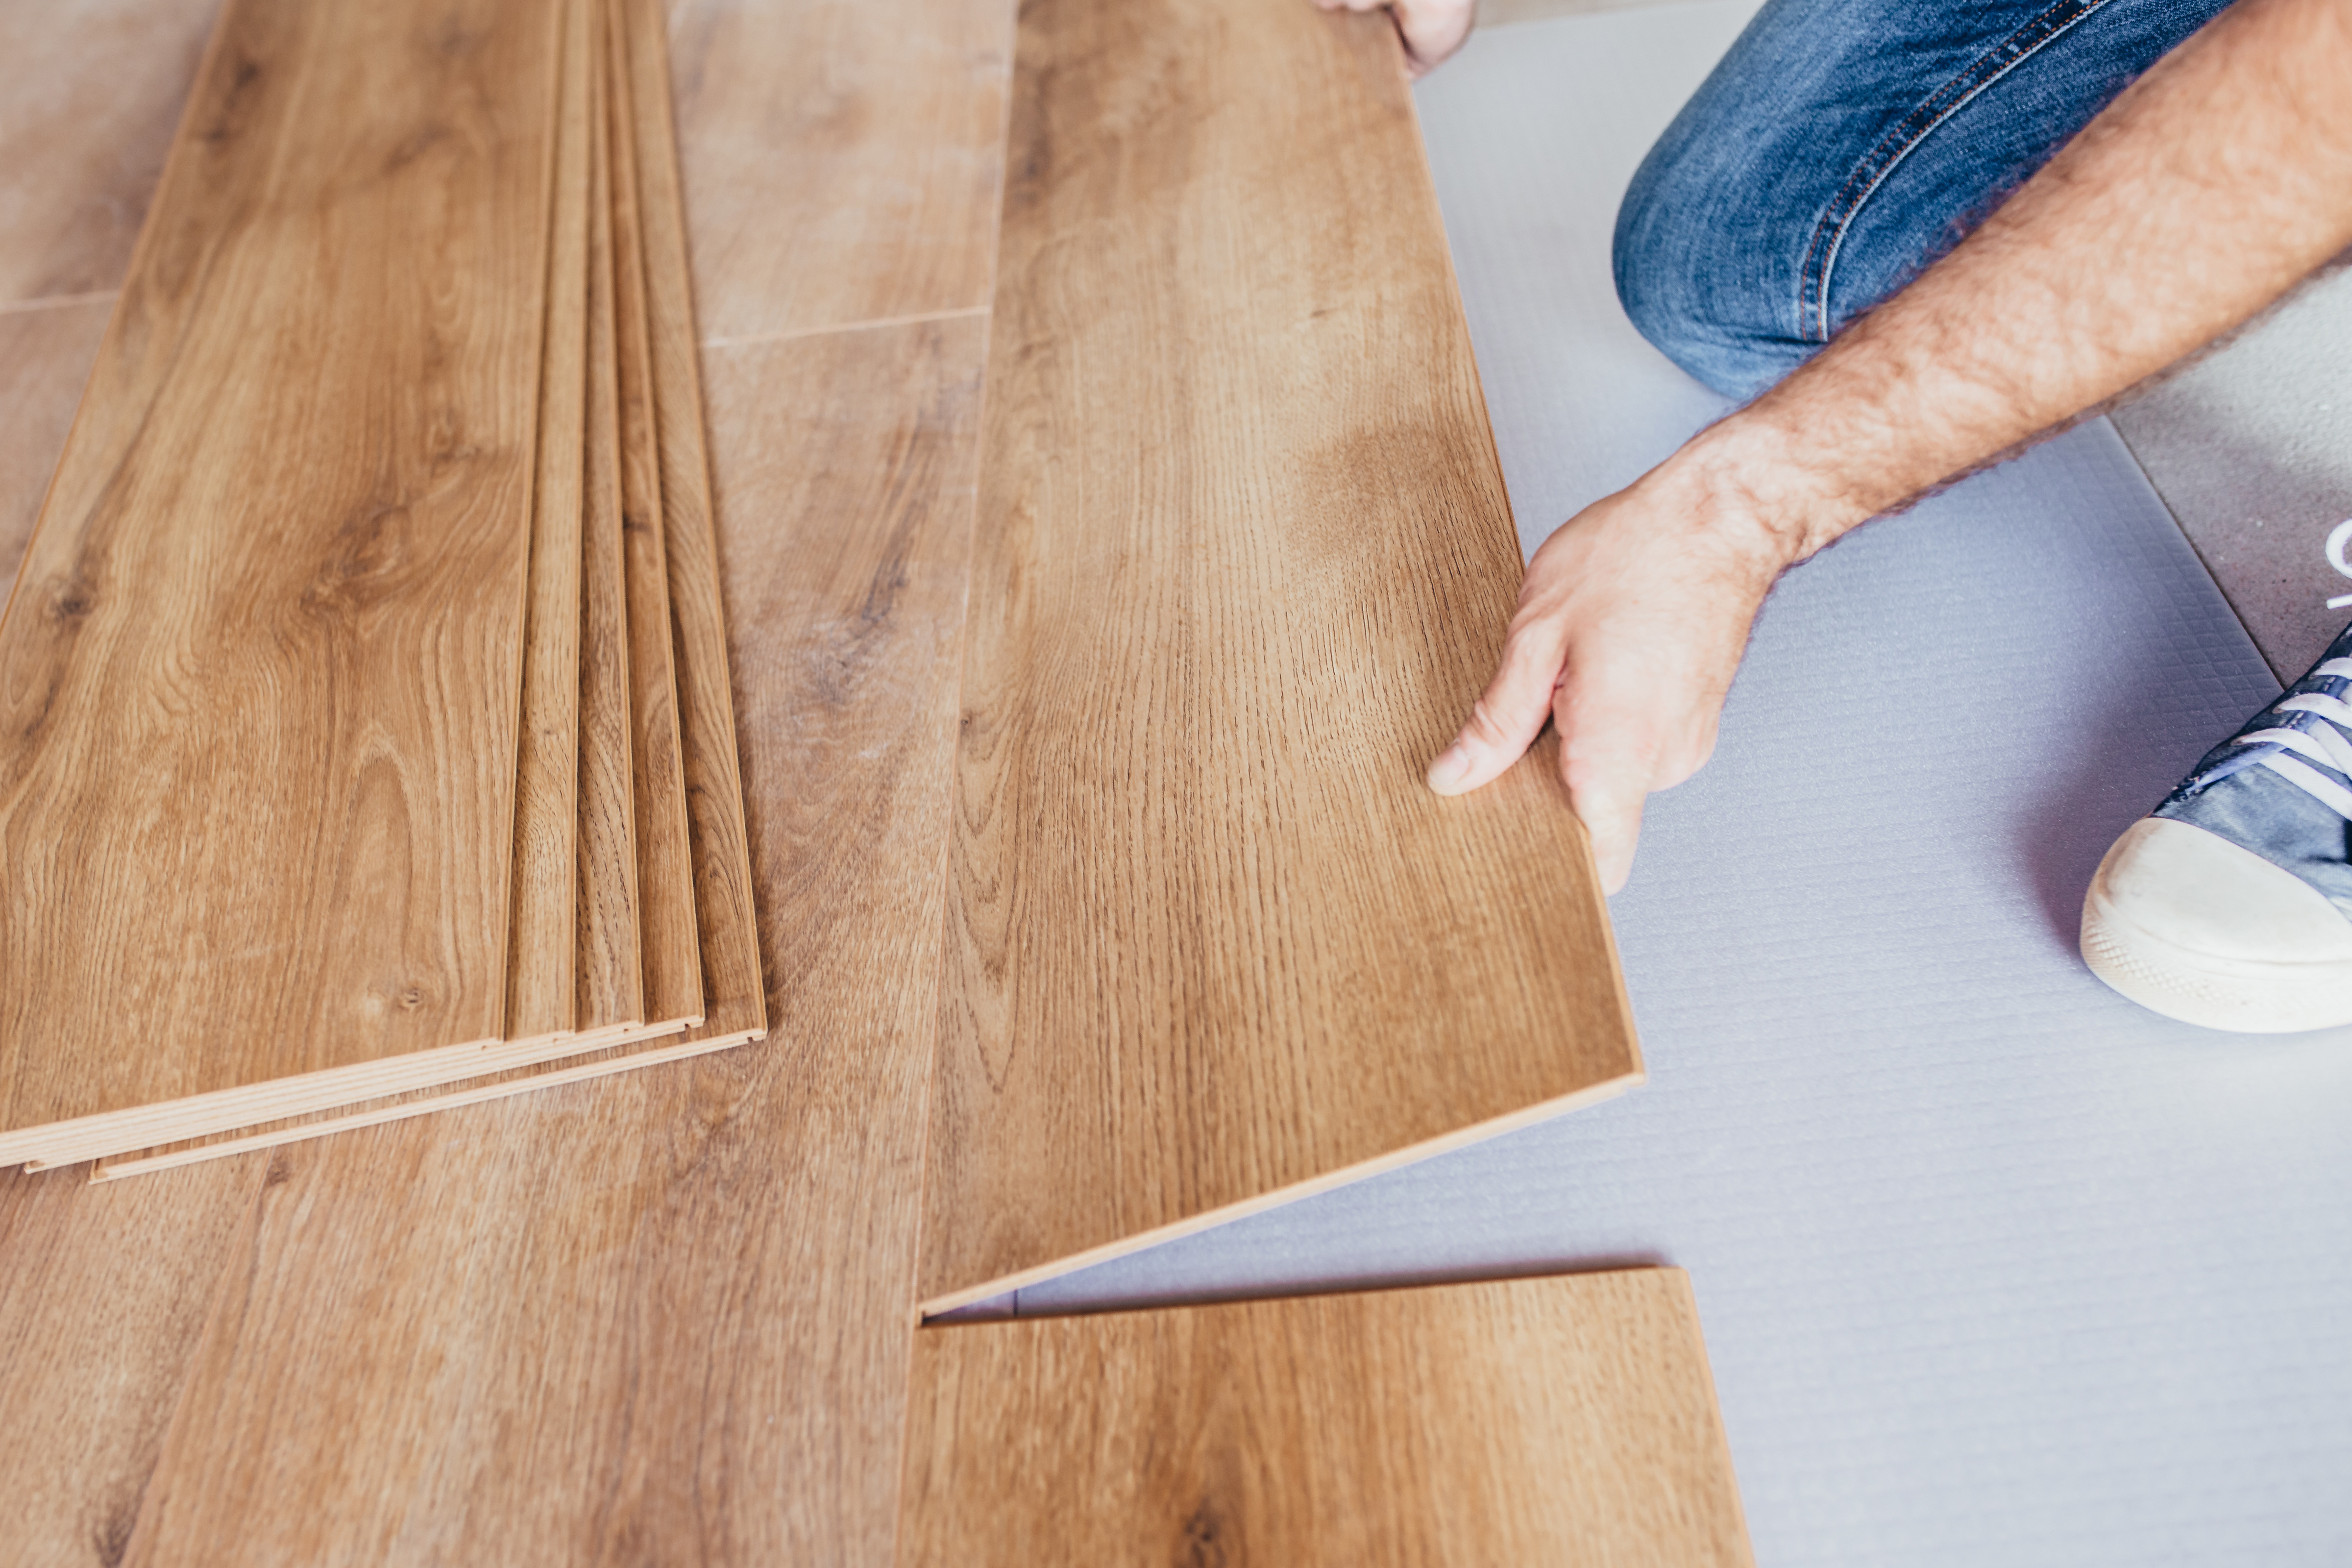 What Is A Floating Floor The Basics, What Does Laminate Flooring Mean